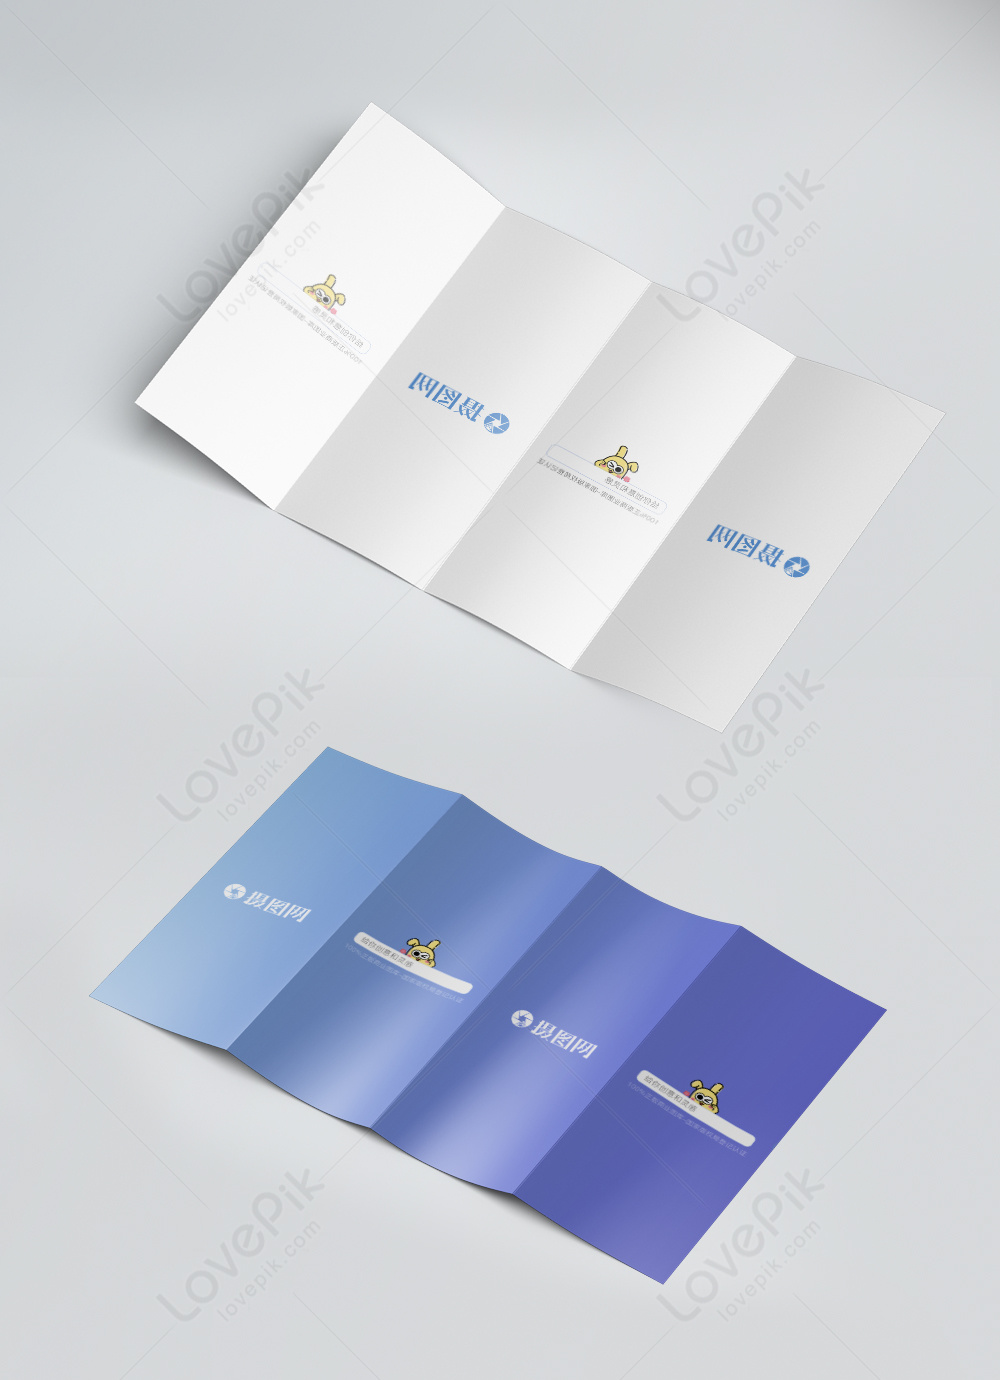 Download Flyer 4 Fold Mockup Template Image Picture Free Download 400469298 Lovepik Com Yellowimages Mockups